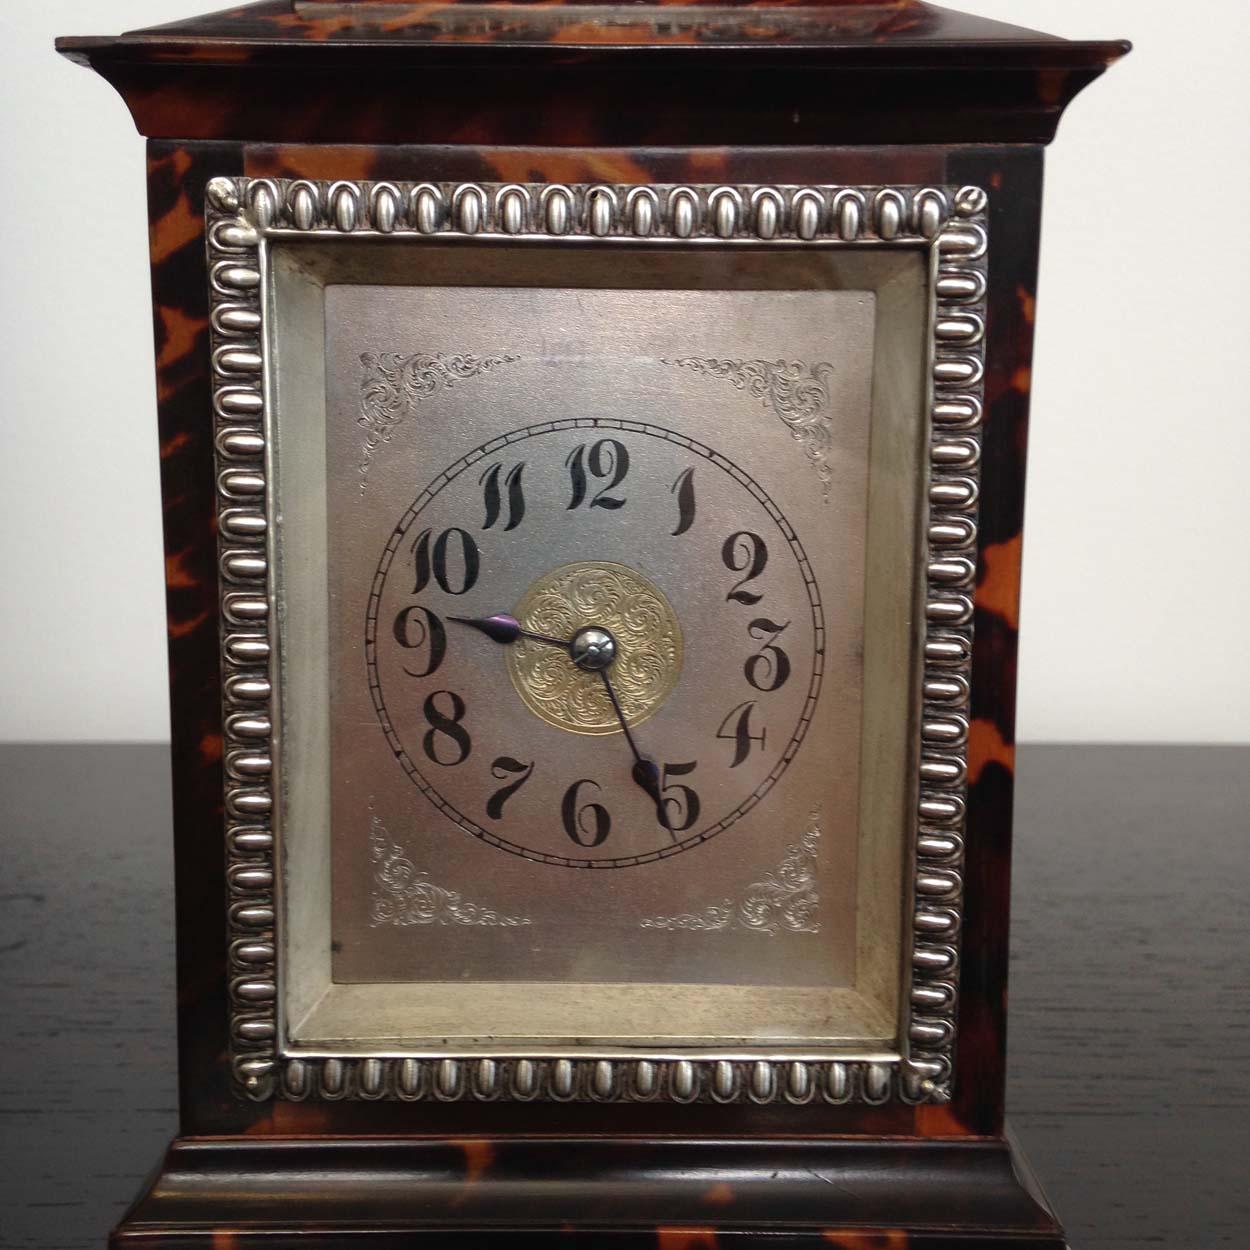 A tortoiseshell and silver carriage clock, maker John Batson, London 1890/91.

A fabulous late 19th century small Victorian carriage clock, tortoiseshell veneered with sterling silver mounts and feet.

The case is raised on silver claw feet and